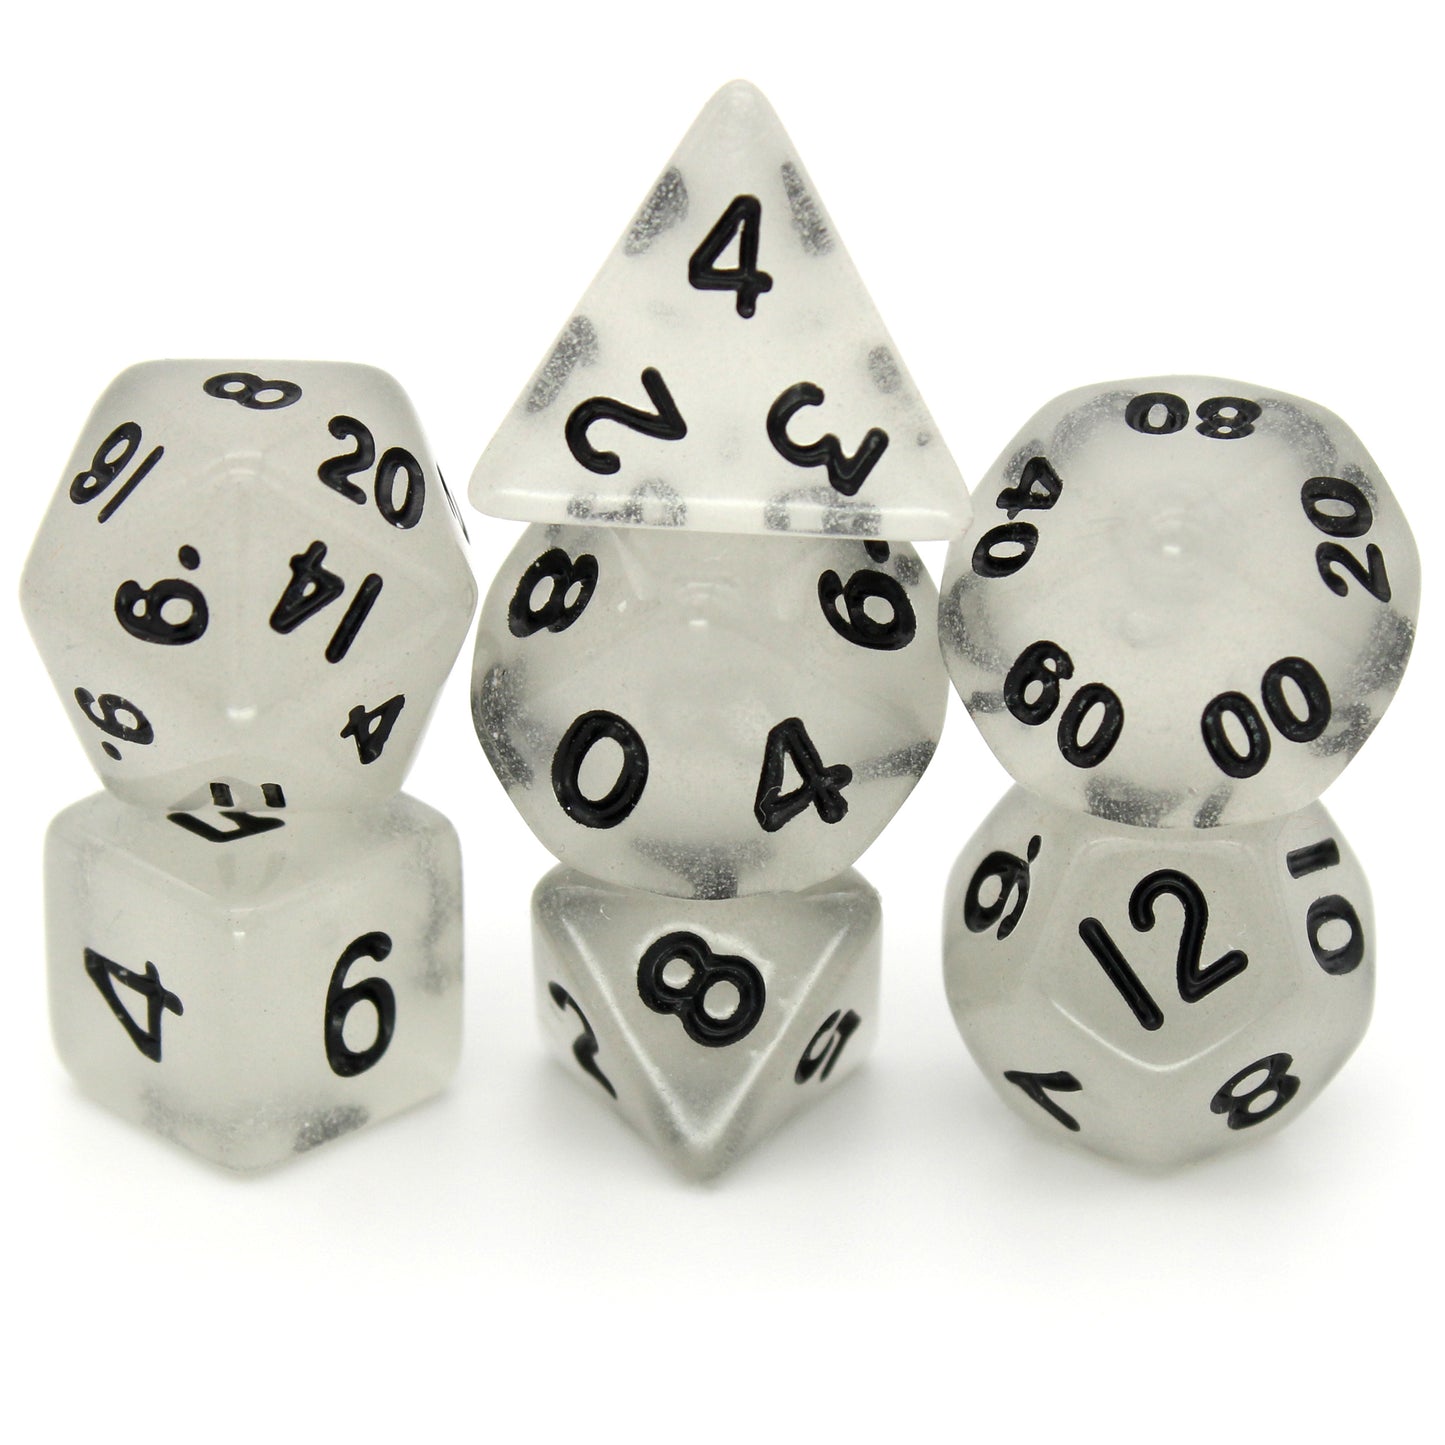 Raindrops is a 7-piece 13mm semi-opaque grey resin dice set, inked in black. It belongs to our tiny but mighty Wee Lads collection.